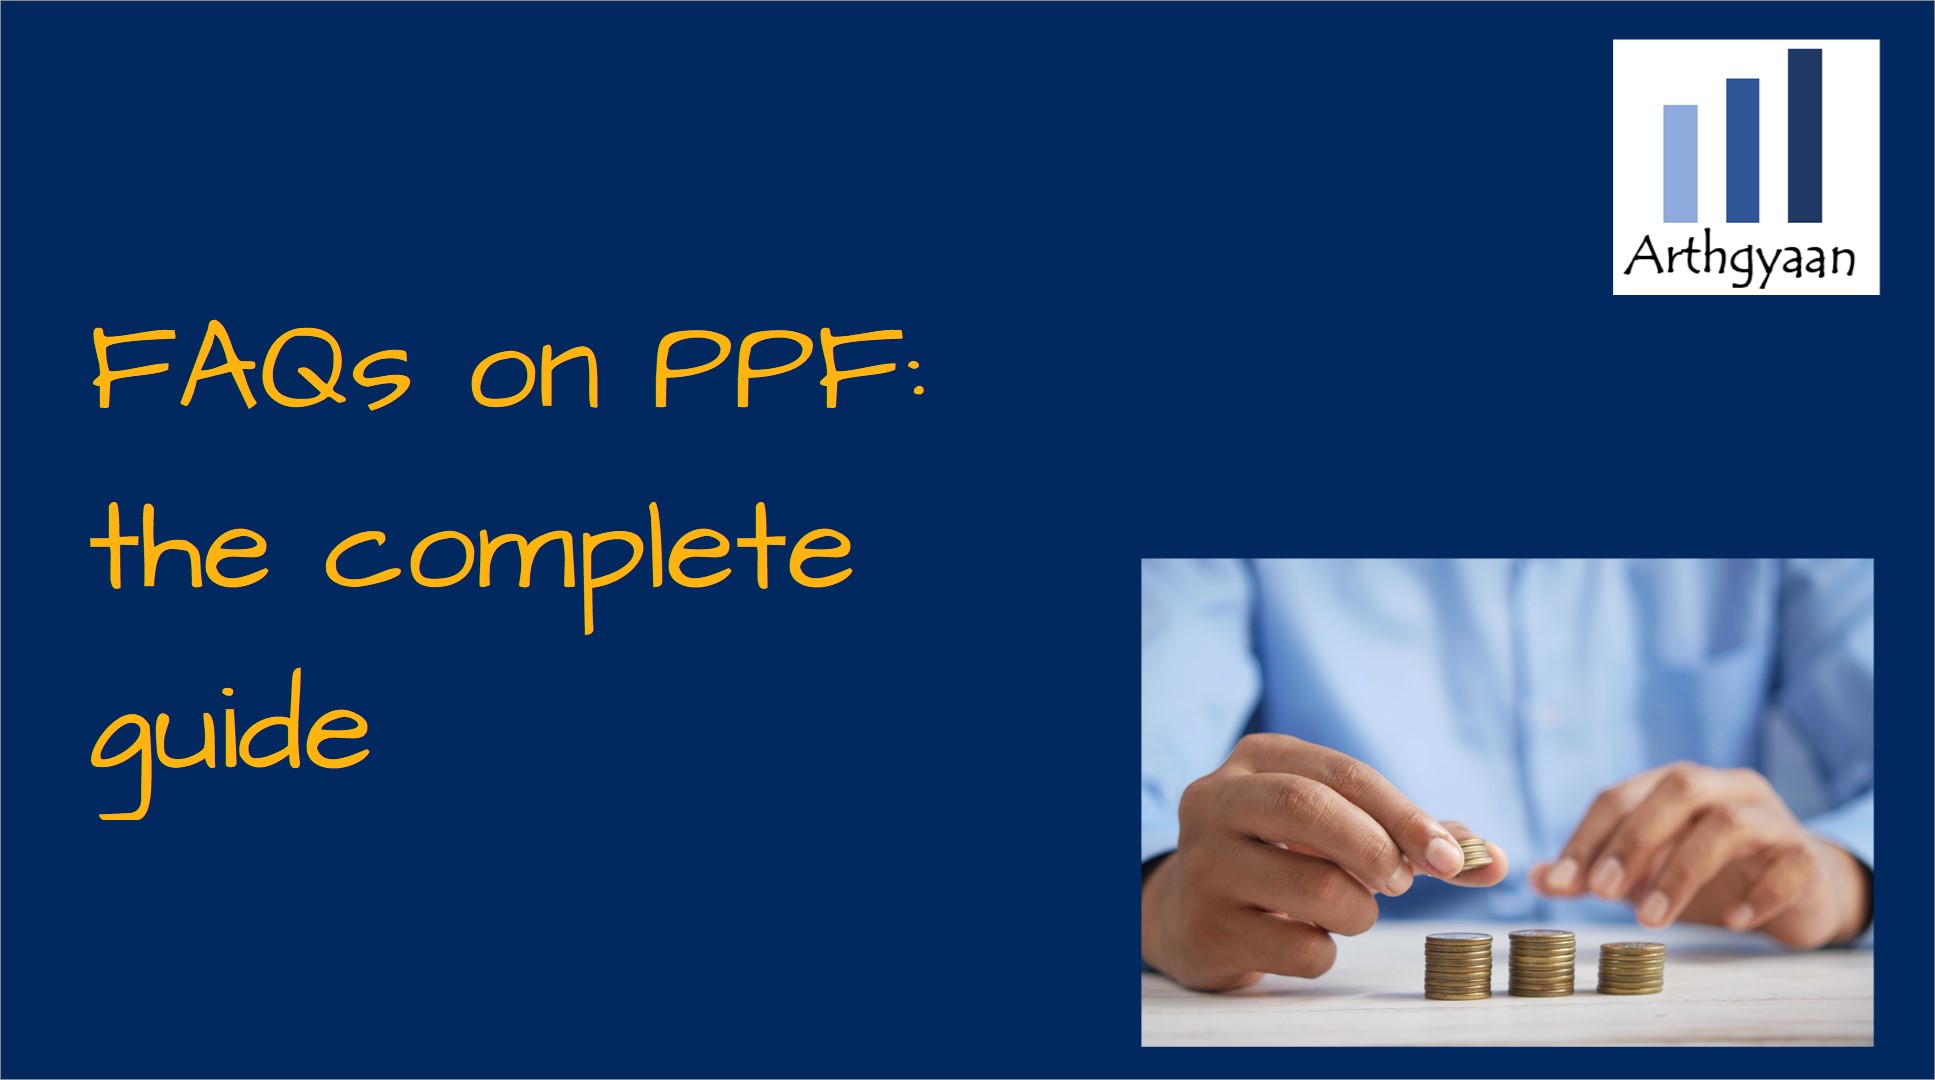 <p>This article compiles an exhaustive list of FAQs for Public Provident fund (PPF).</p>

